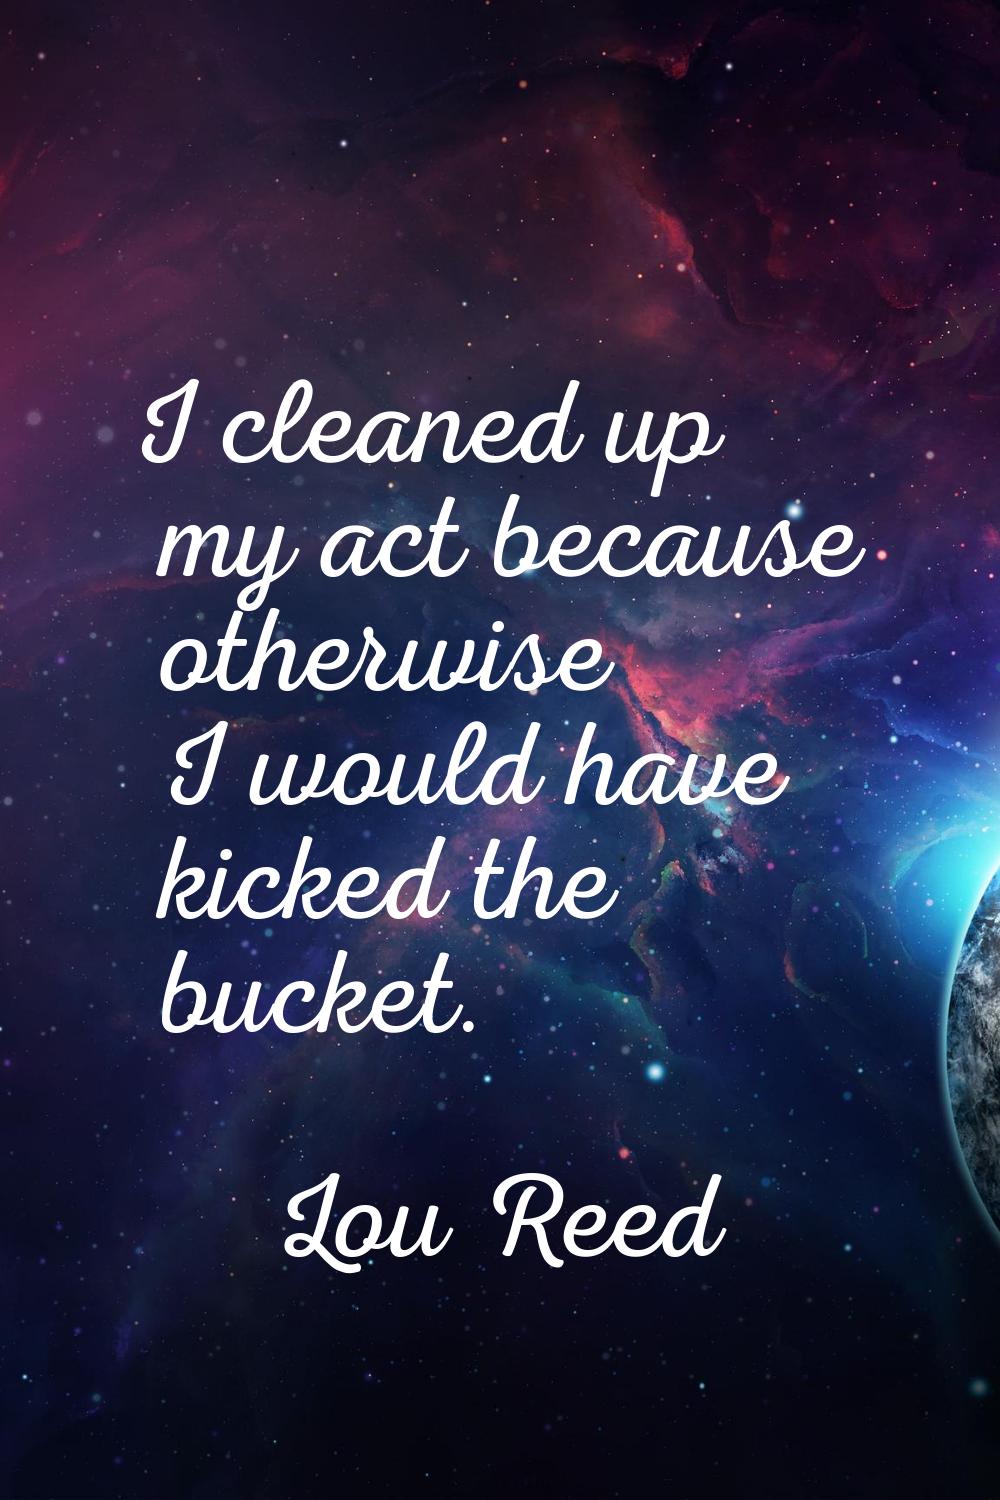 I cleaned up my act because otherwise I would have kicked the bucket.